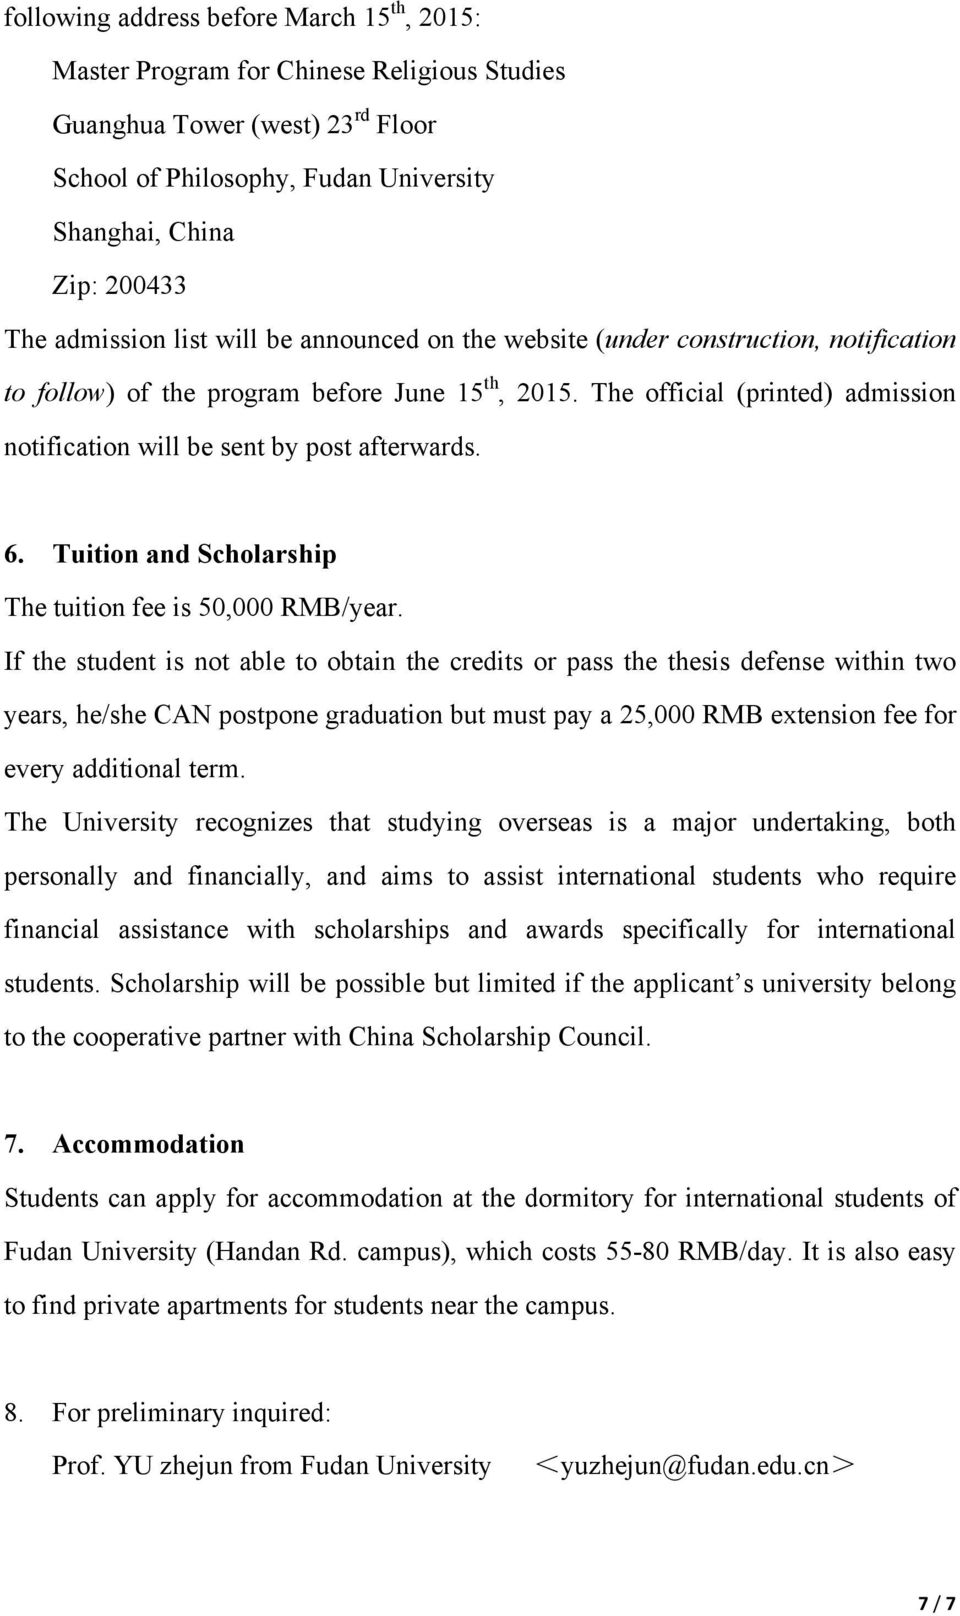 The official (printed) admission notification will be sent by post afterwards. 6. Tuition and Scholarship The tuition fee is 50,000 RMB/year.